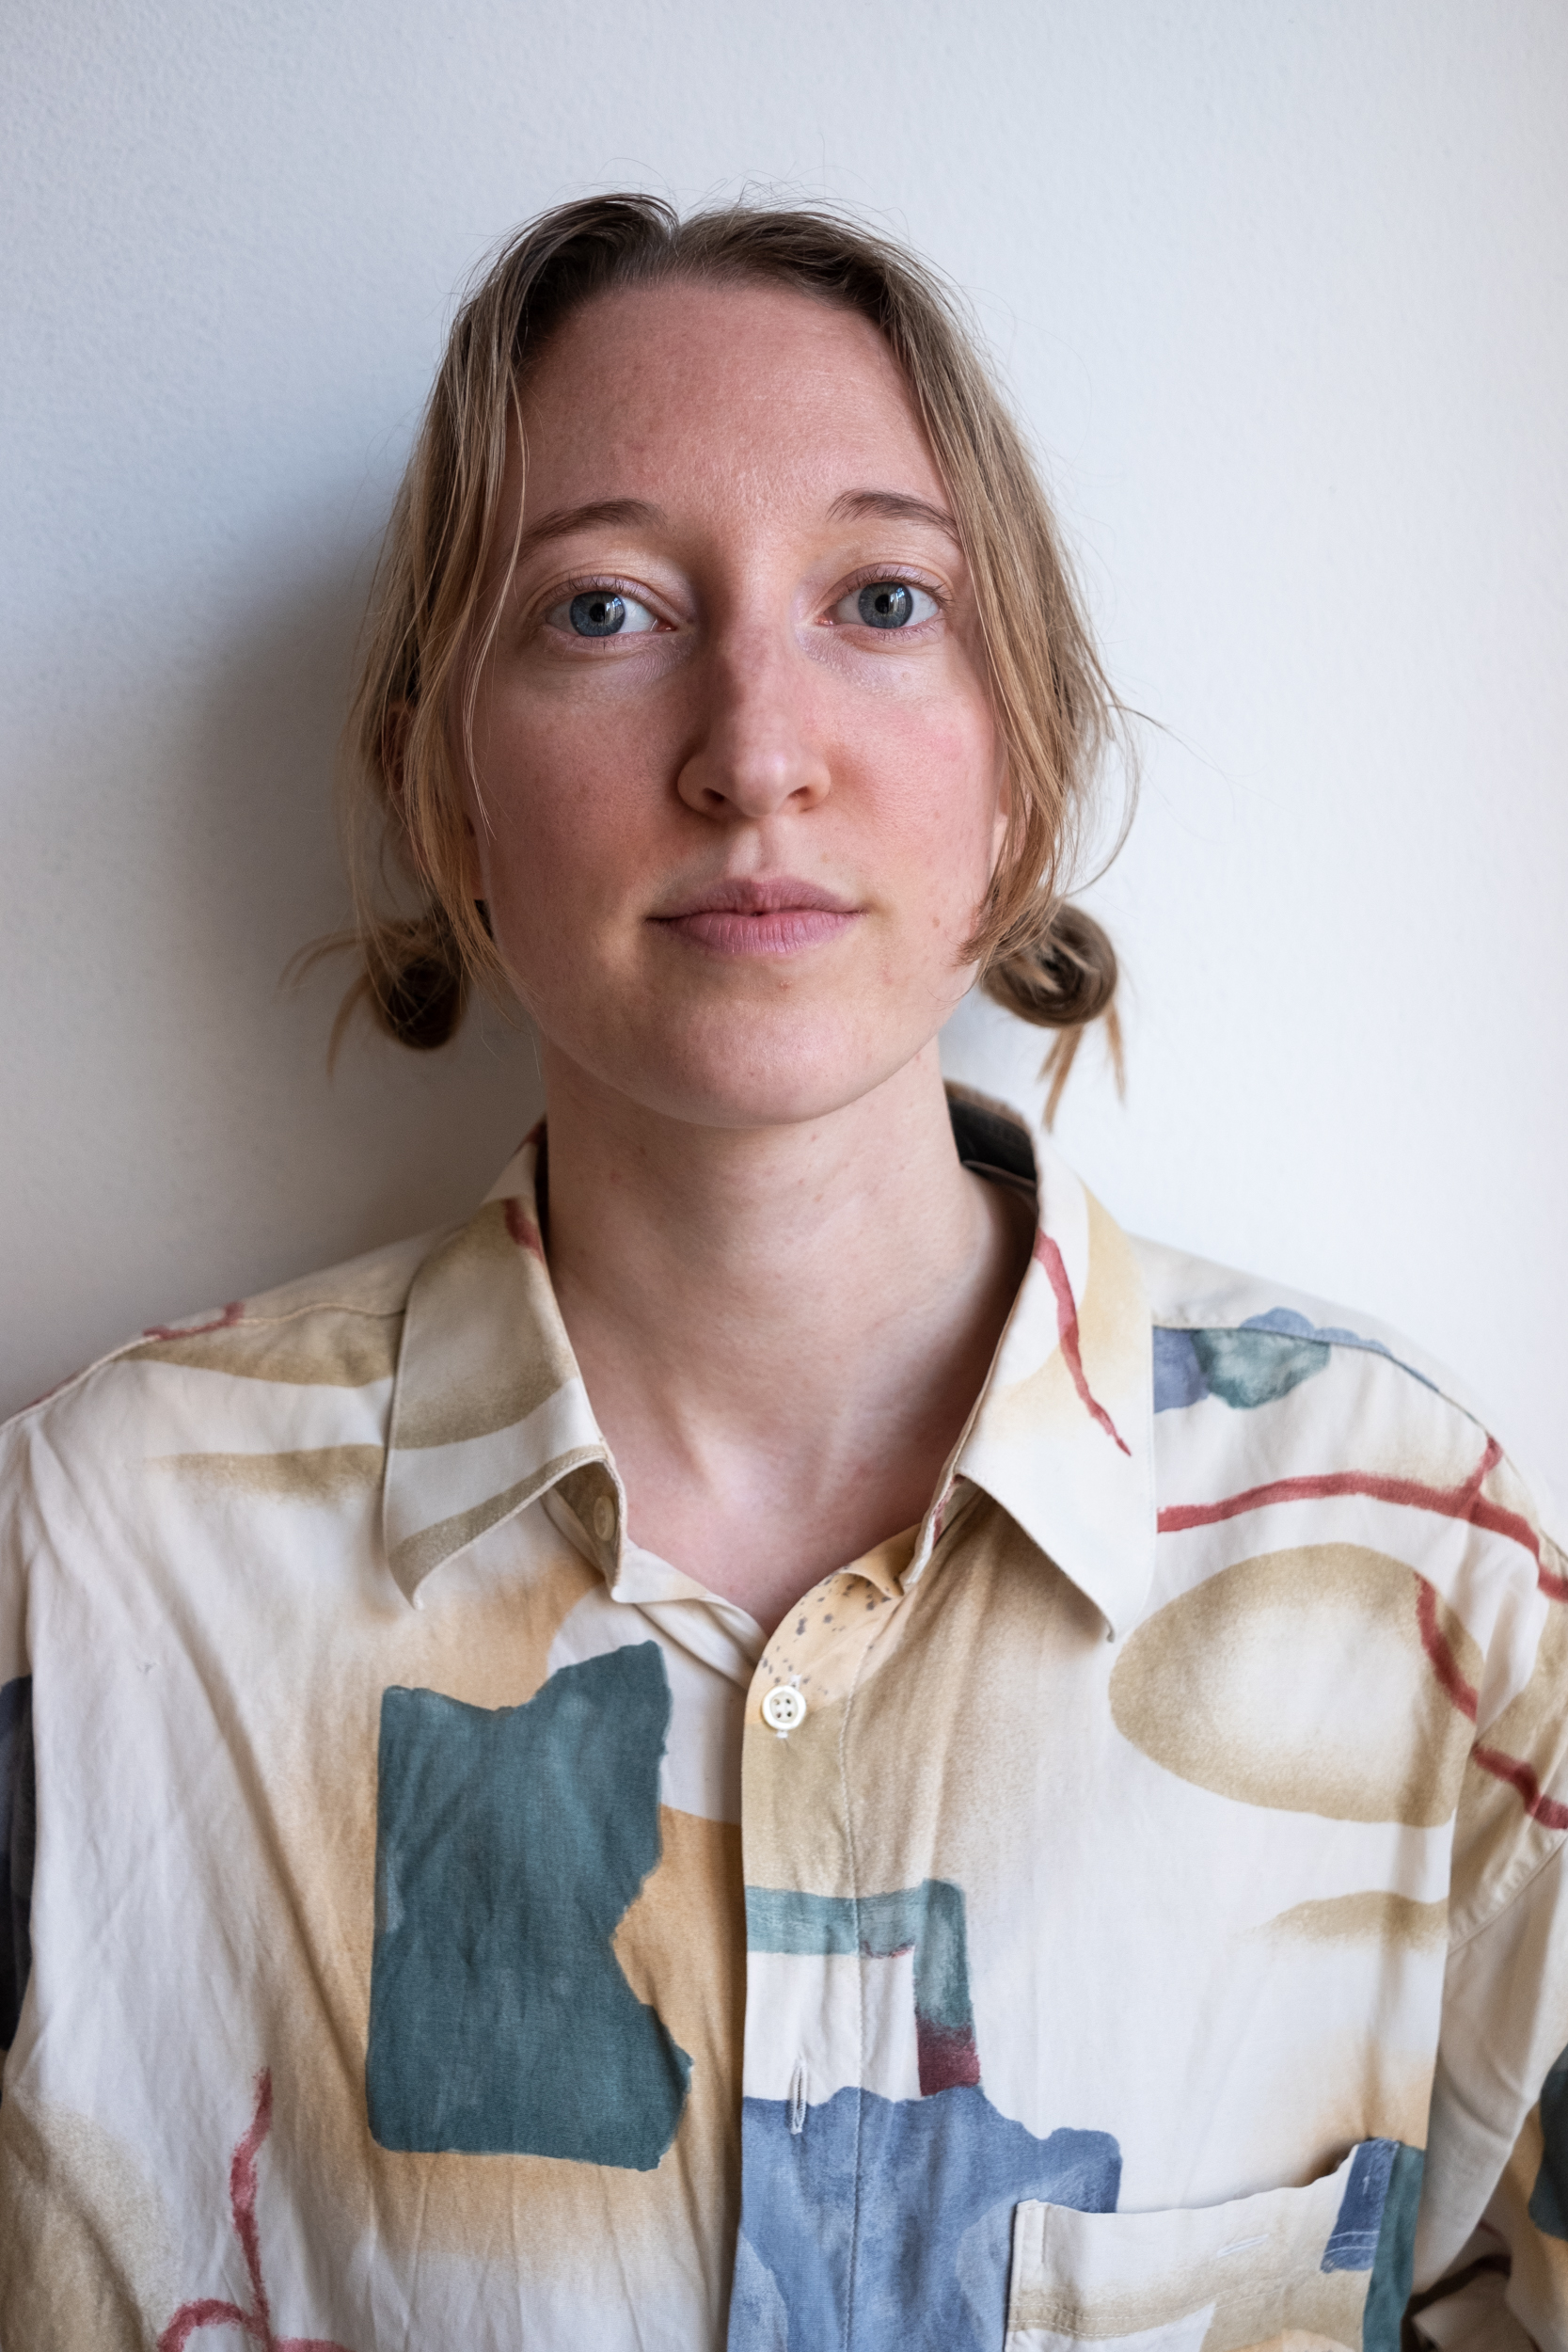 A photo of Louise Essex, a white woman with mind-length blonde-brown hair tied back in bunches. She stairs straight at the camera, and is wearing a pale cream coloured shirt with abstract blue shapes on it.